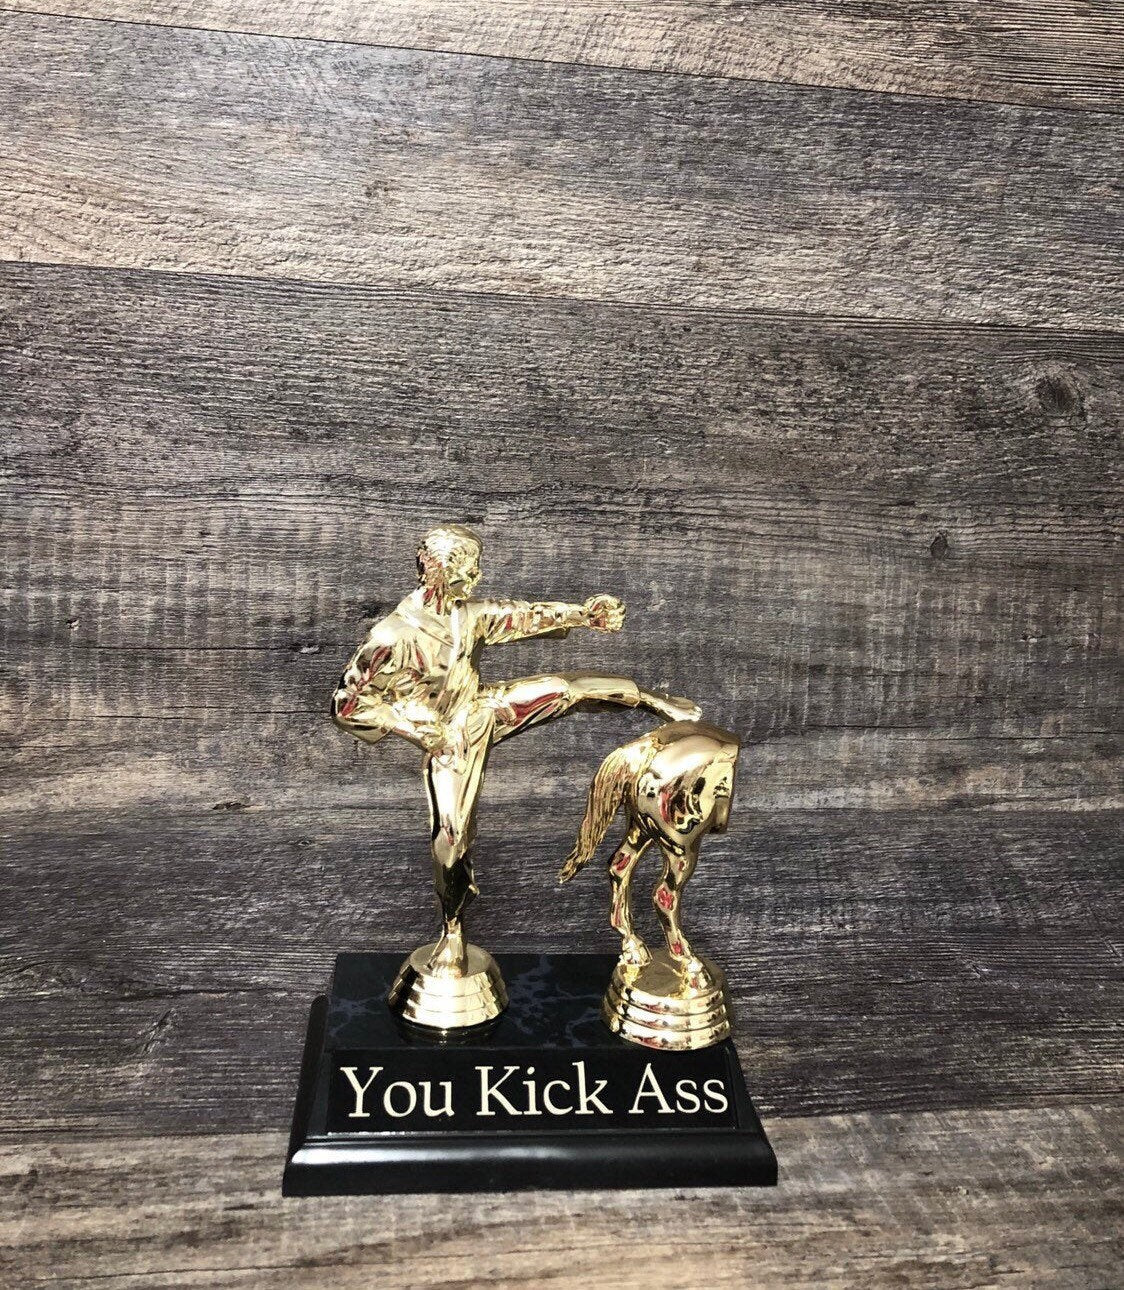 You Kick Ass Funny Trophy Karate Trophy Jack Ass Horses Rear Funny Award Gag Gift Inspirational Top Sales Best Friend Spouse Father's Day